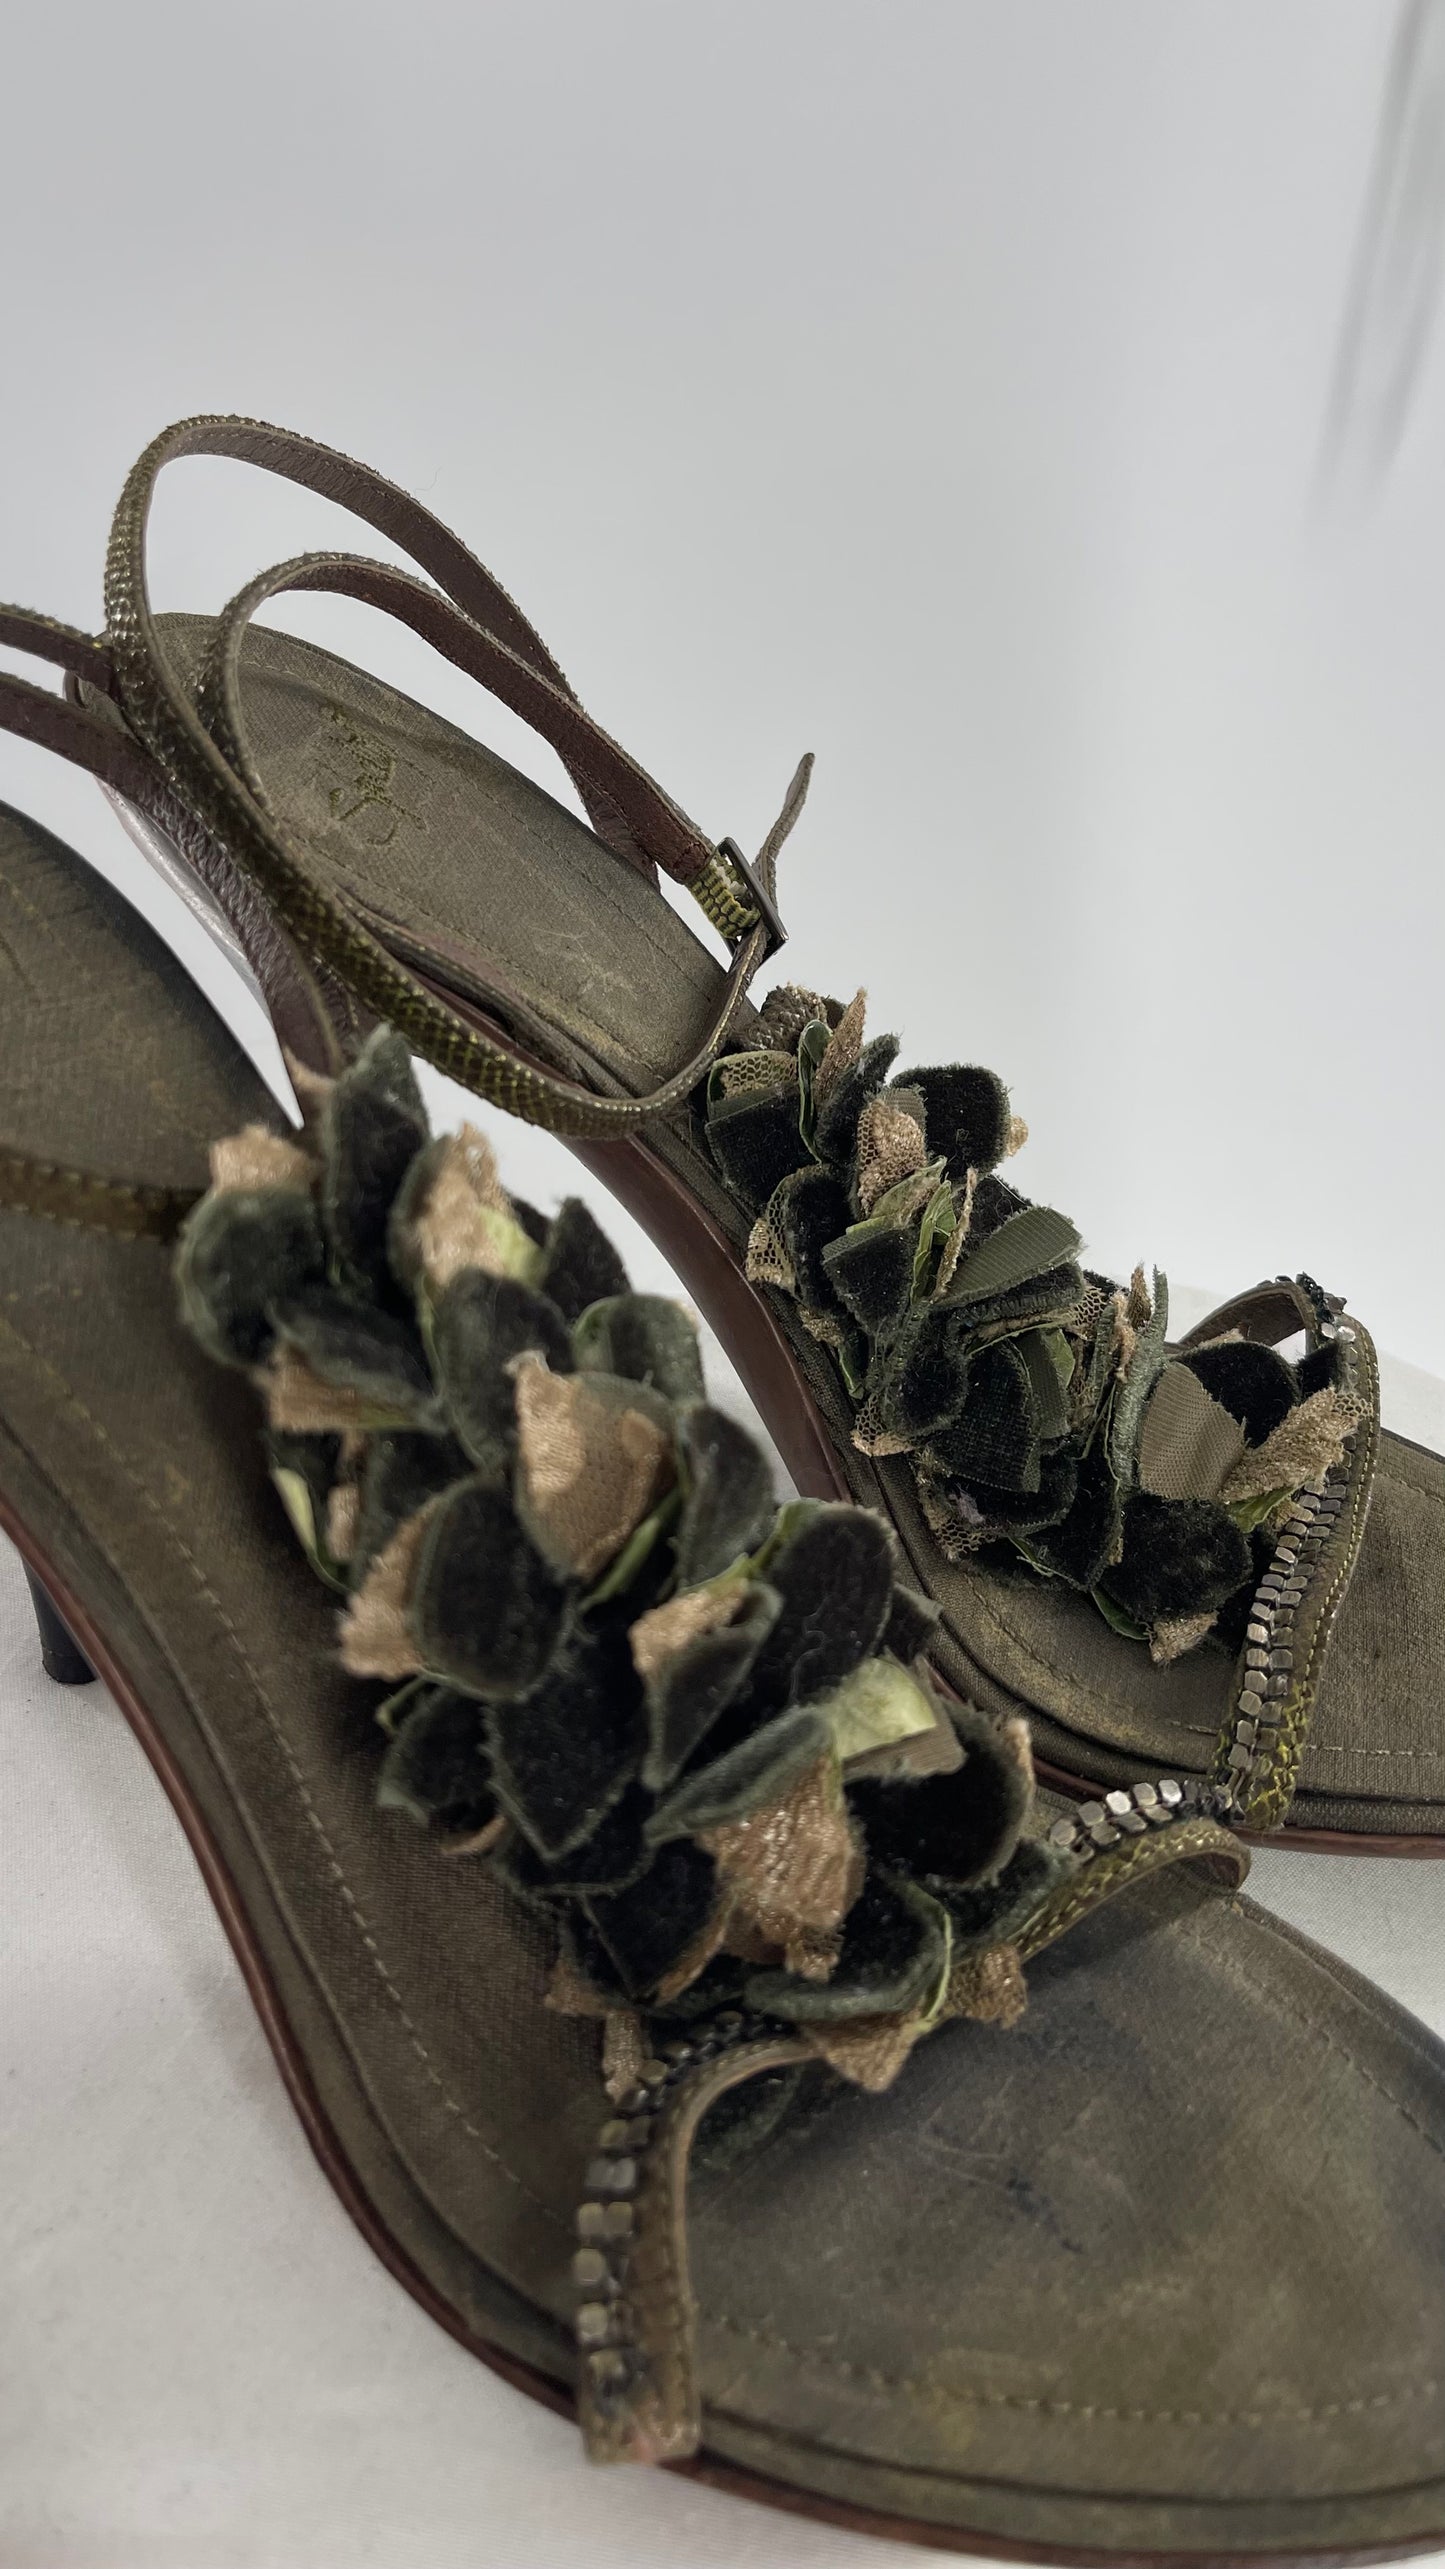 Vintage 1990s Italian Studio Designer Heel Forest Nymph, Mixed Texture Rosette Detailing with Leather Straps and Sole (8.5)